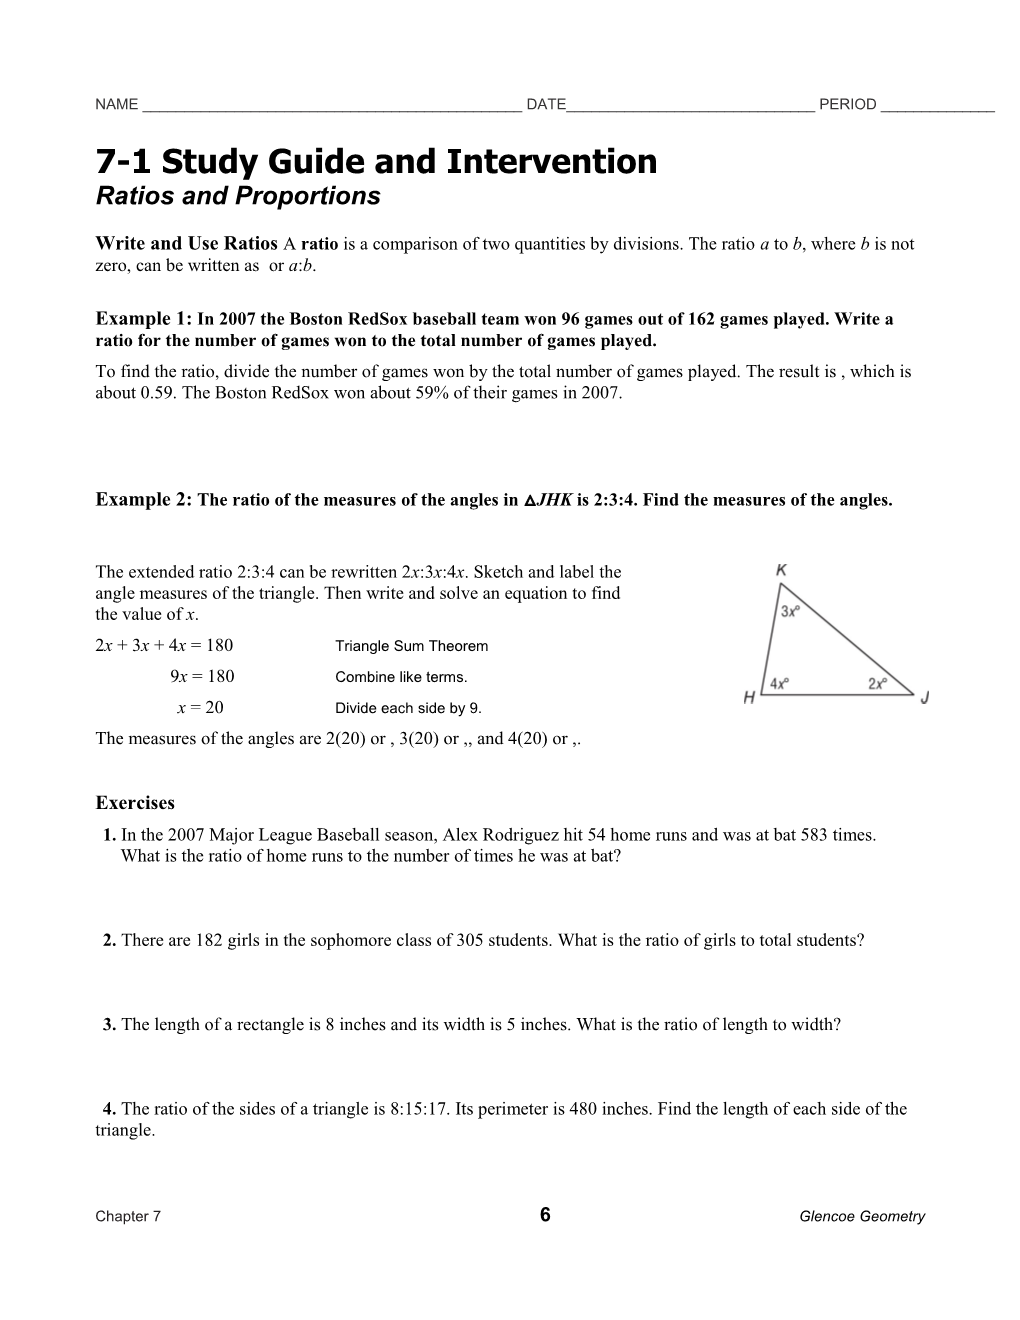 7-1 Study Guide and Intervention